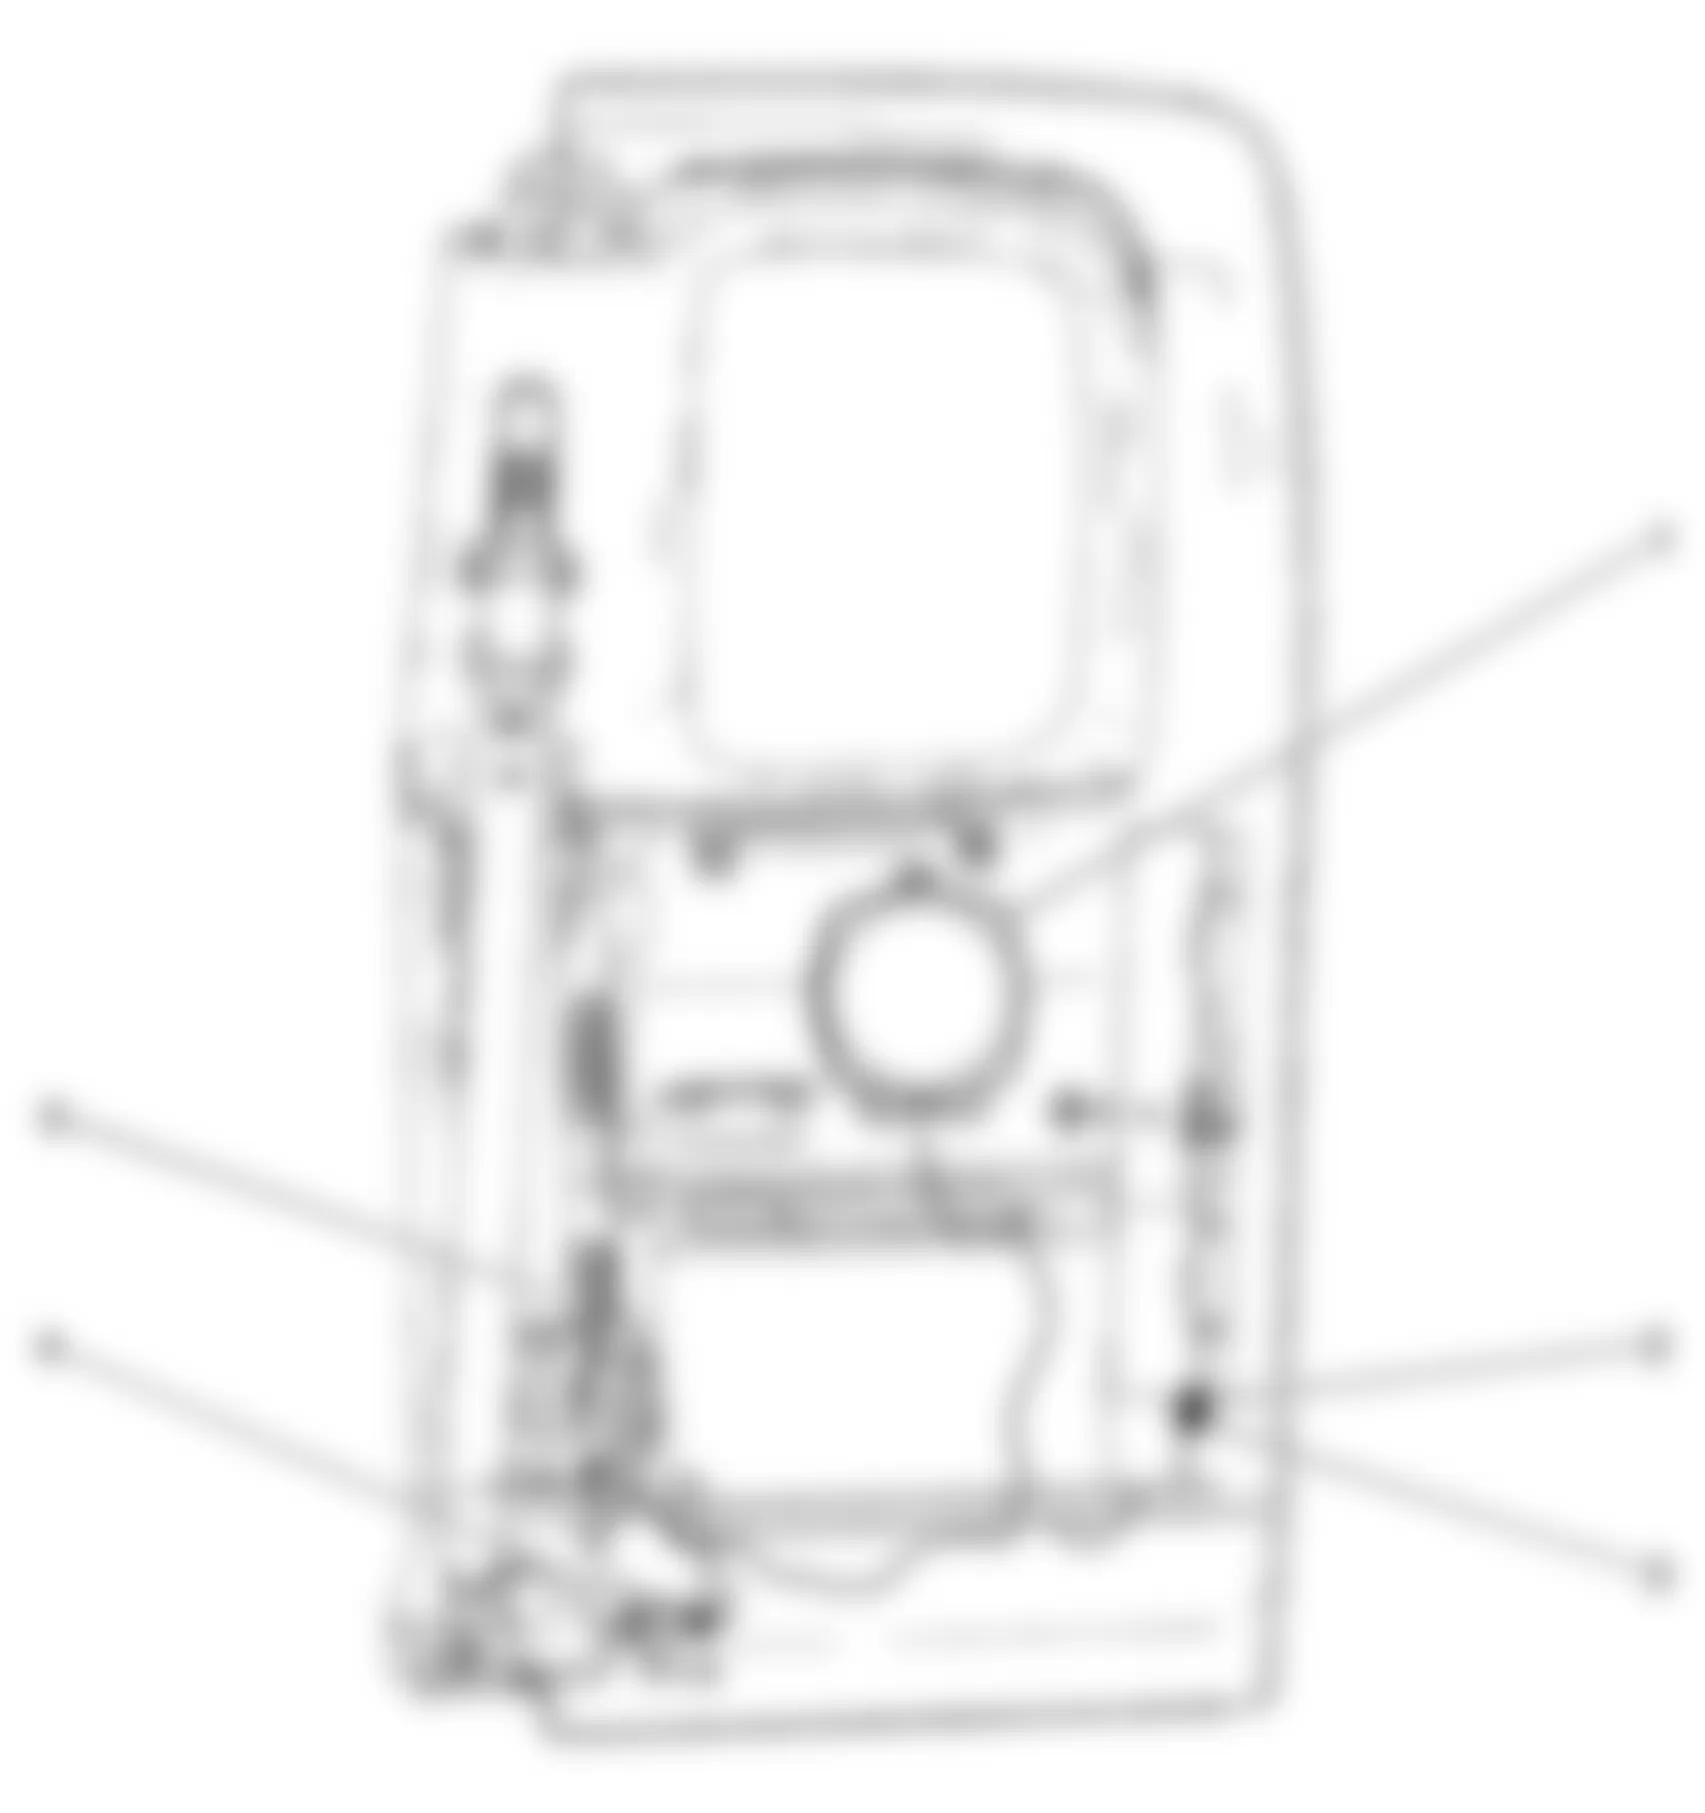 GMC Canyon 2010 - Component Locations -  Right Rear Door (Extended Cab)